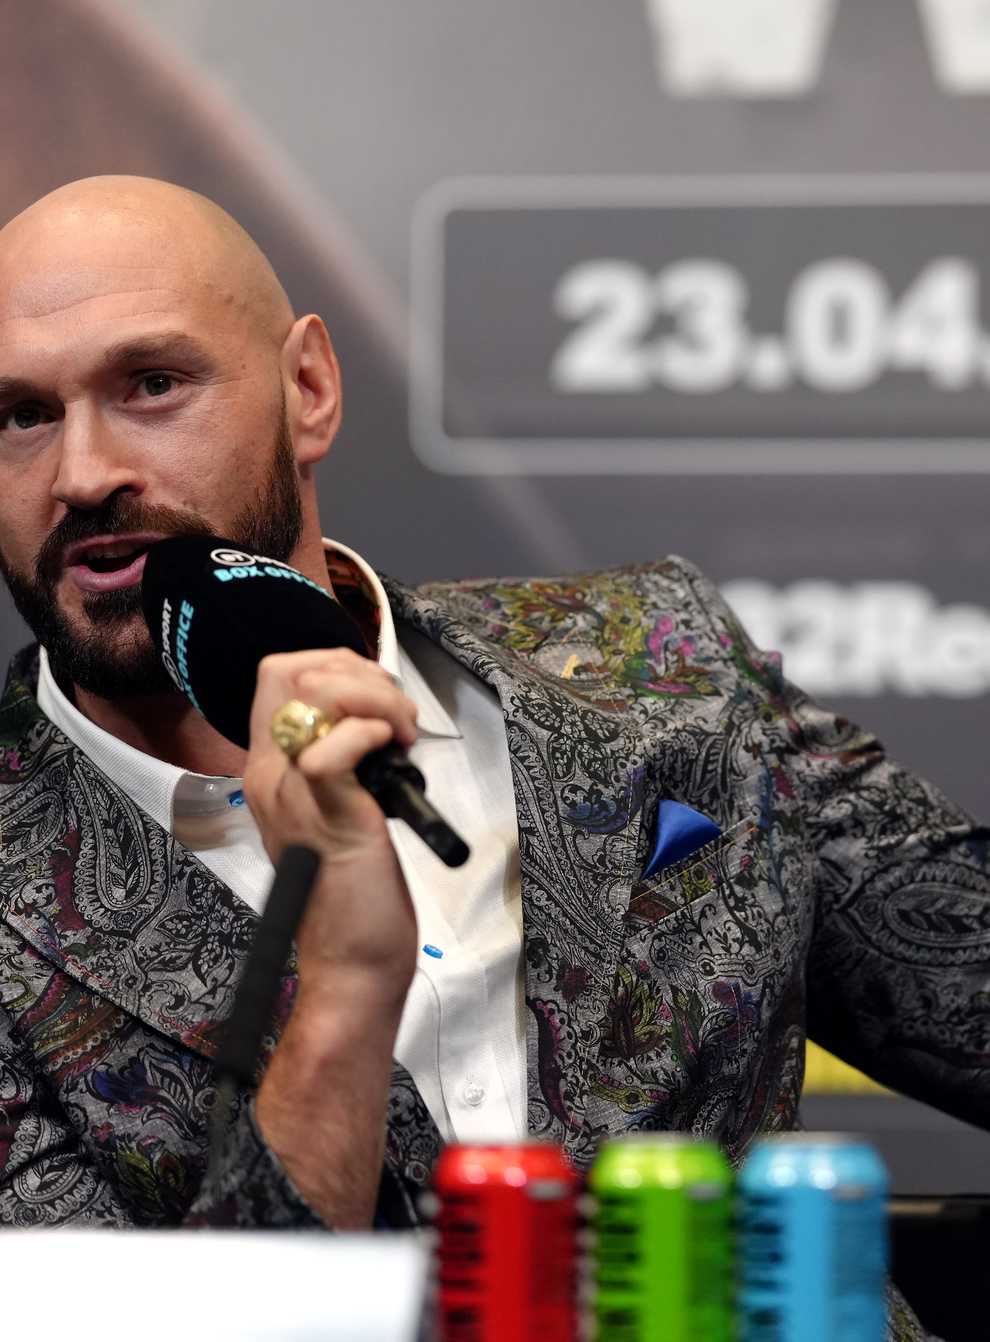 Tyson Fury, pictured, will defend his WBC heavyweight title next month against Dillian Whyte (John Walton/PA)